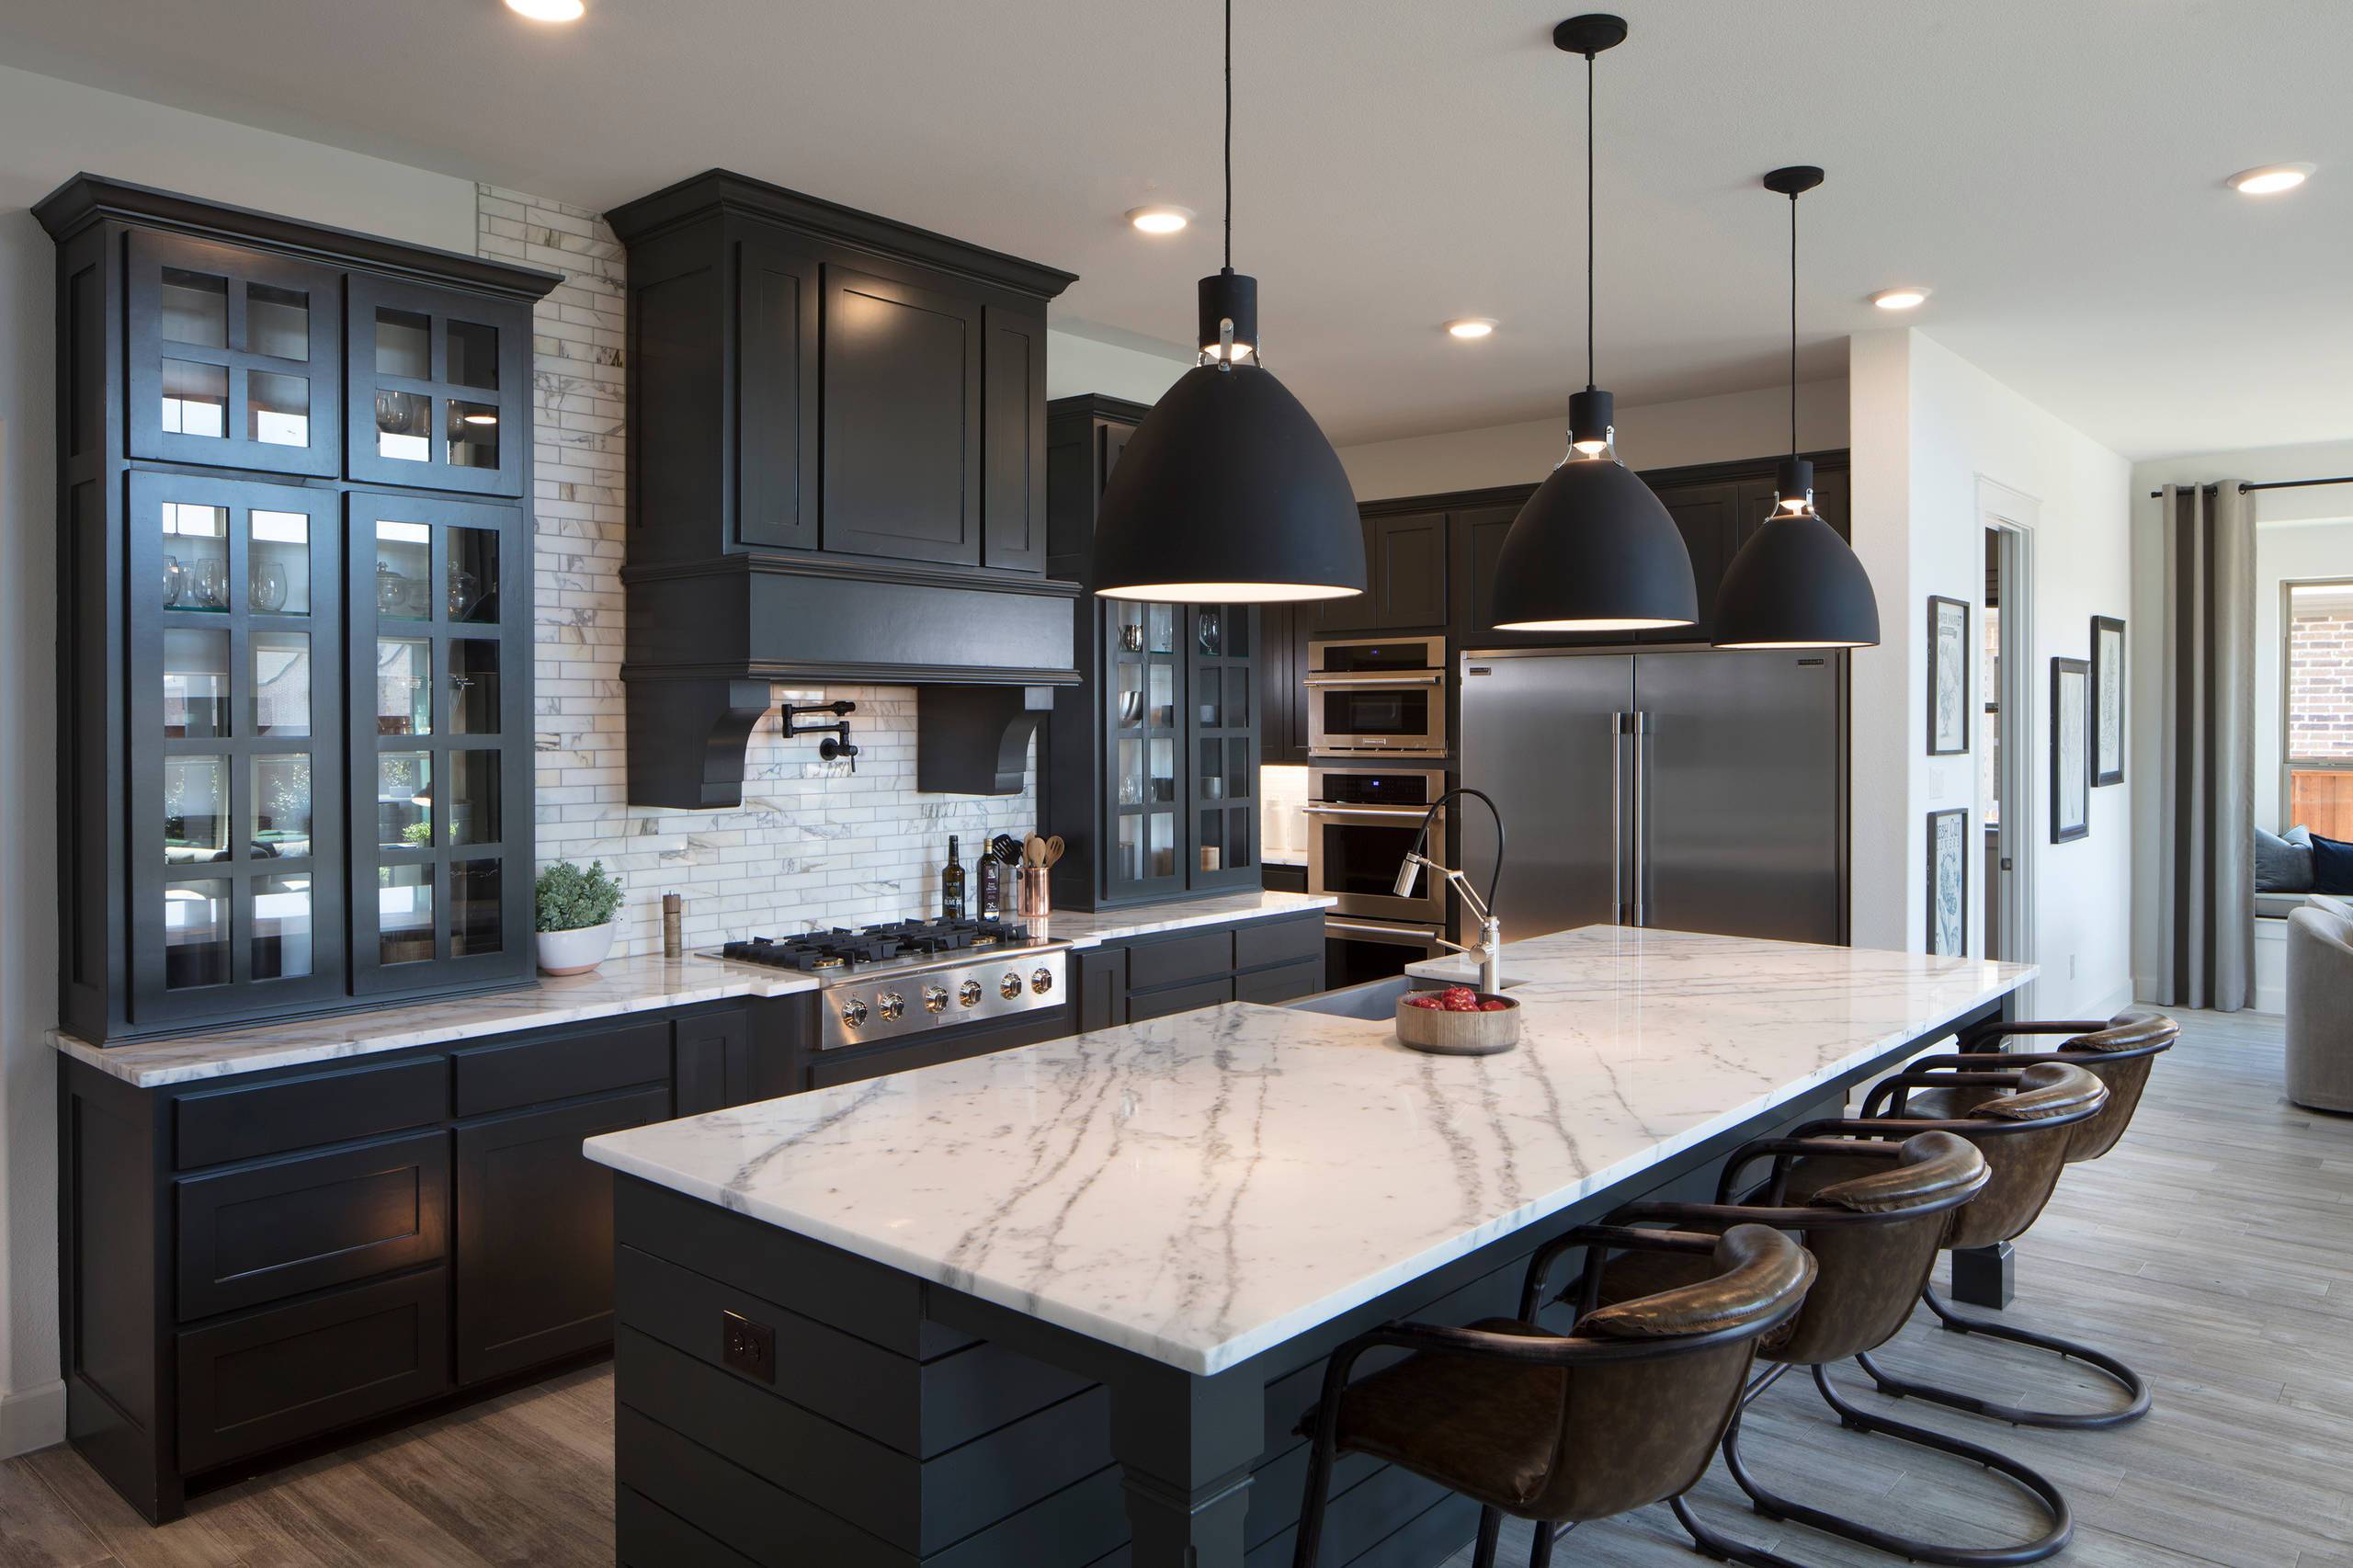 Refined and elegant feel (from Houzz)